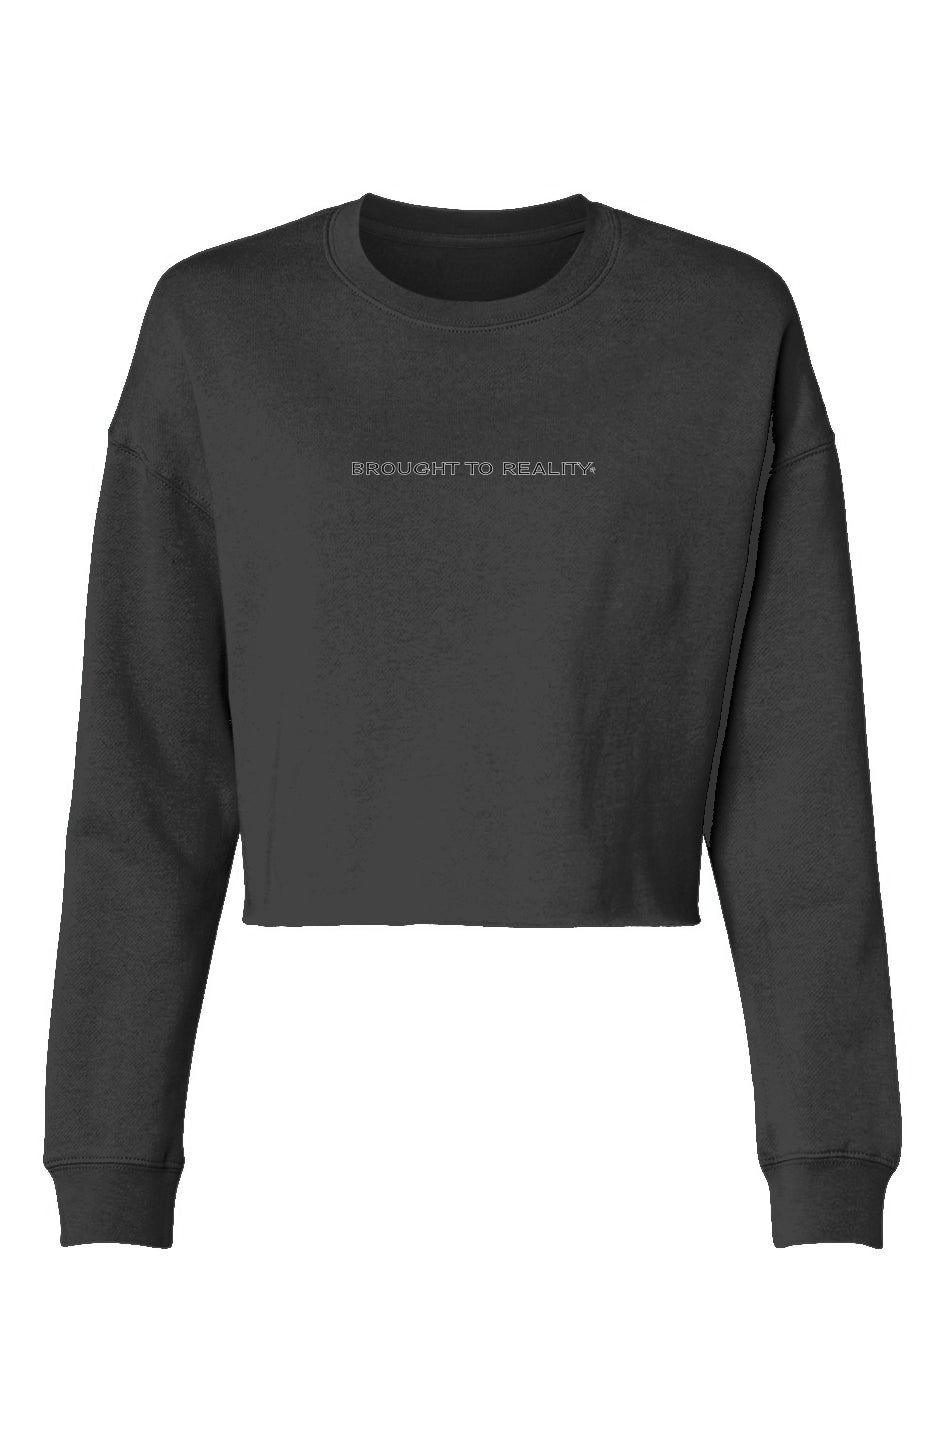 Lightweight Cropped Crew Brought to Reality sweatshirt - Brought To Reality